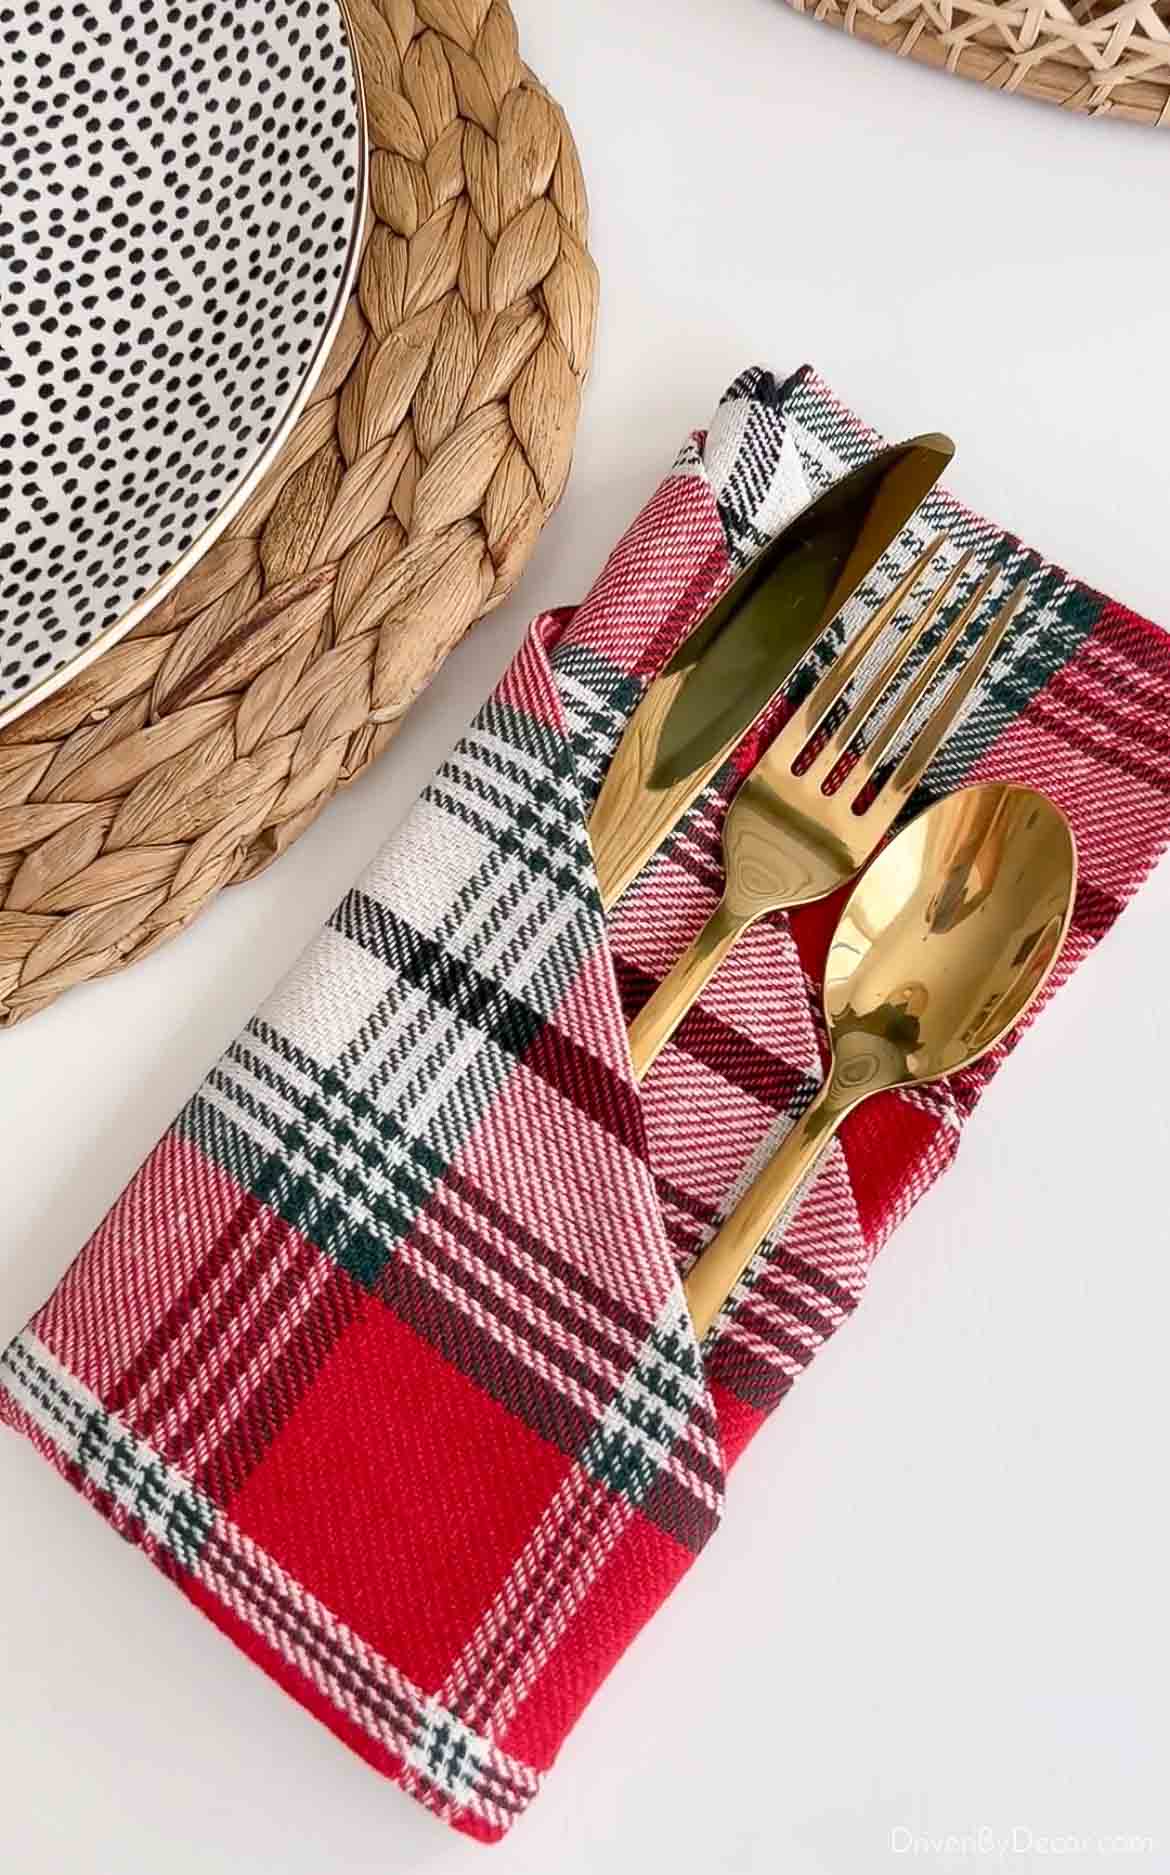 A fun Thanksgiving table decor idea is to fold your napkins in a new way!